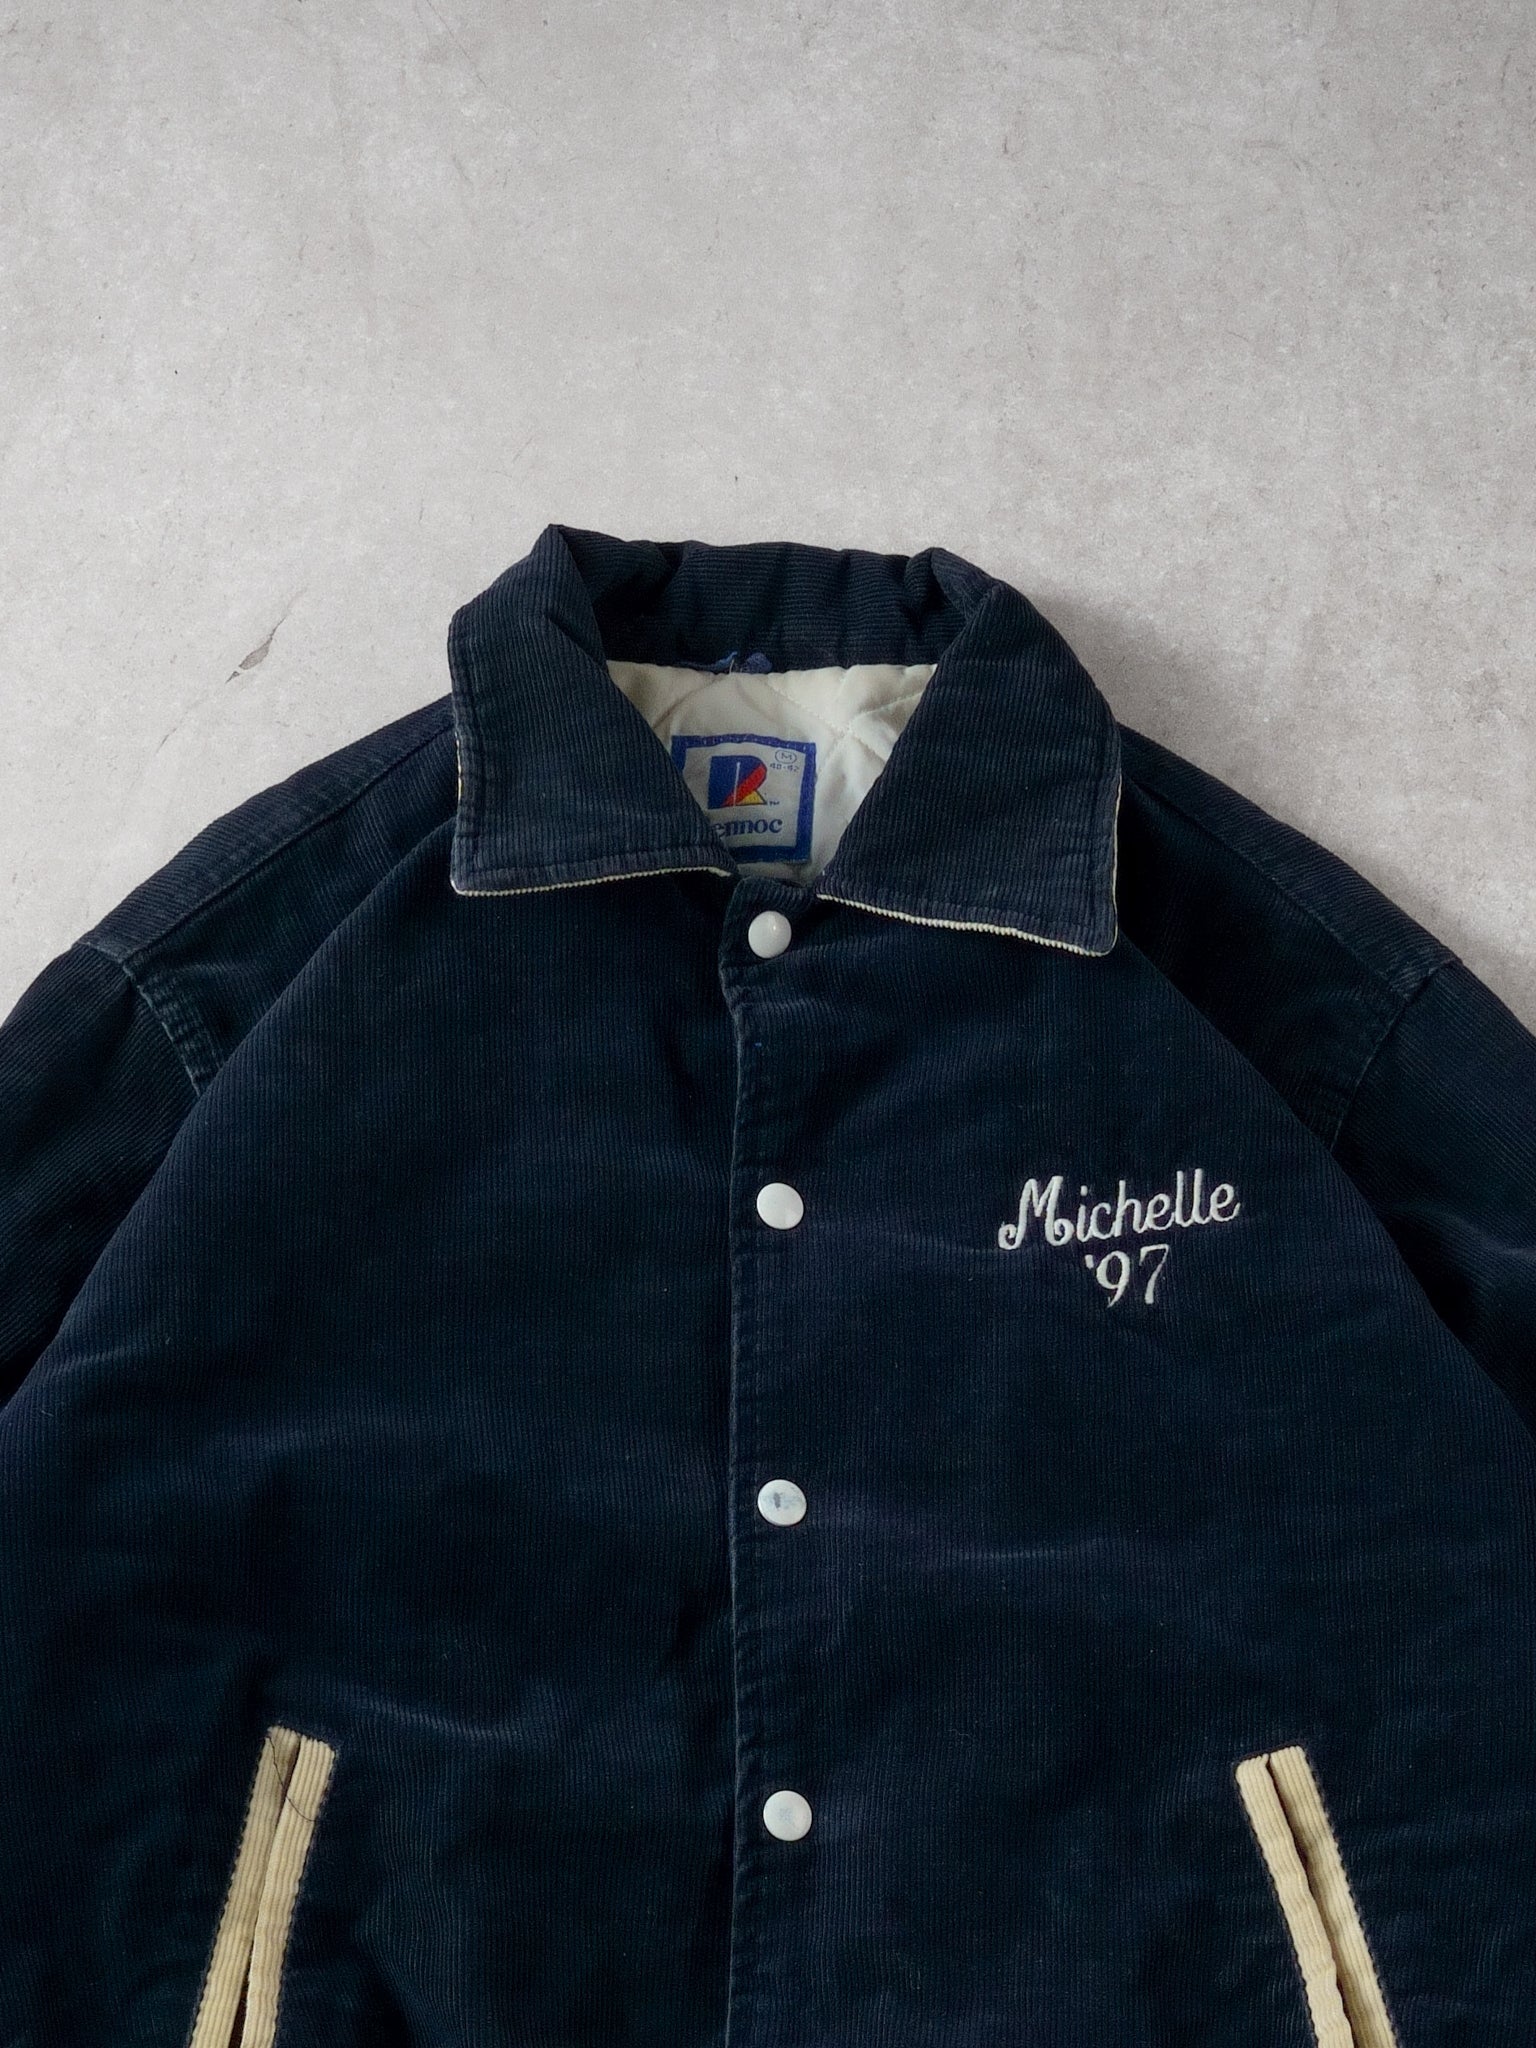 Vintage 90s Navy Blue Corduroy Council Rock "Michelle" Collared Bomber (M)